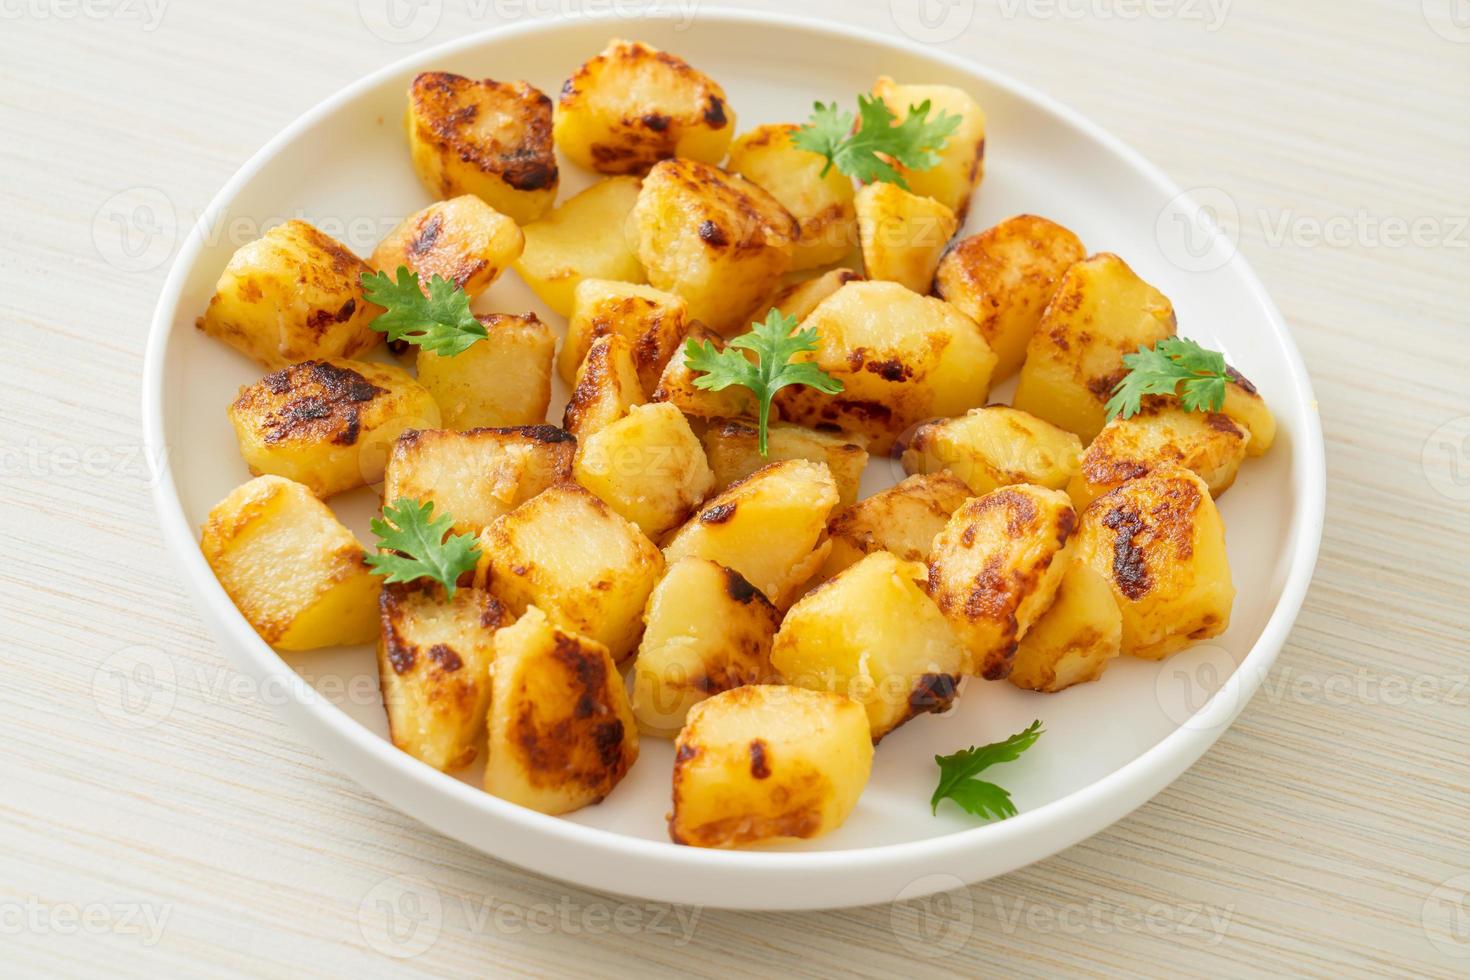 Roasted or grilled potatoes  on plate photo